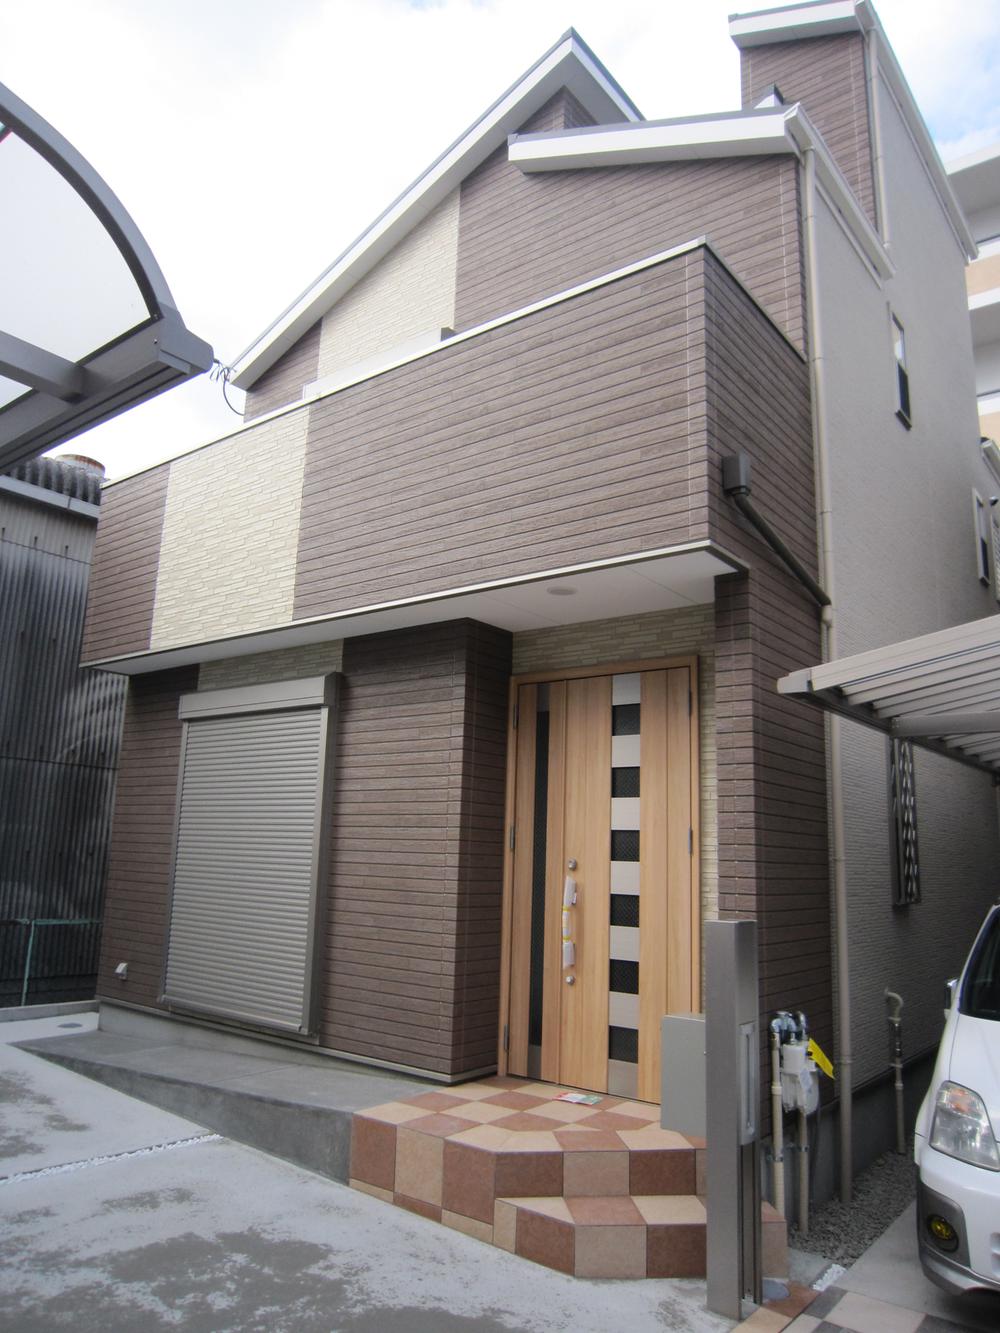 Building plan example (exterior photos). Two-story ・ Sky Terrace (other site)